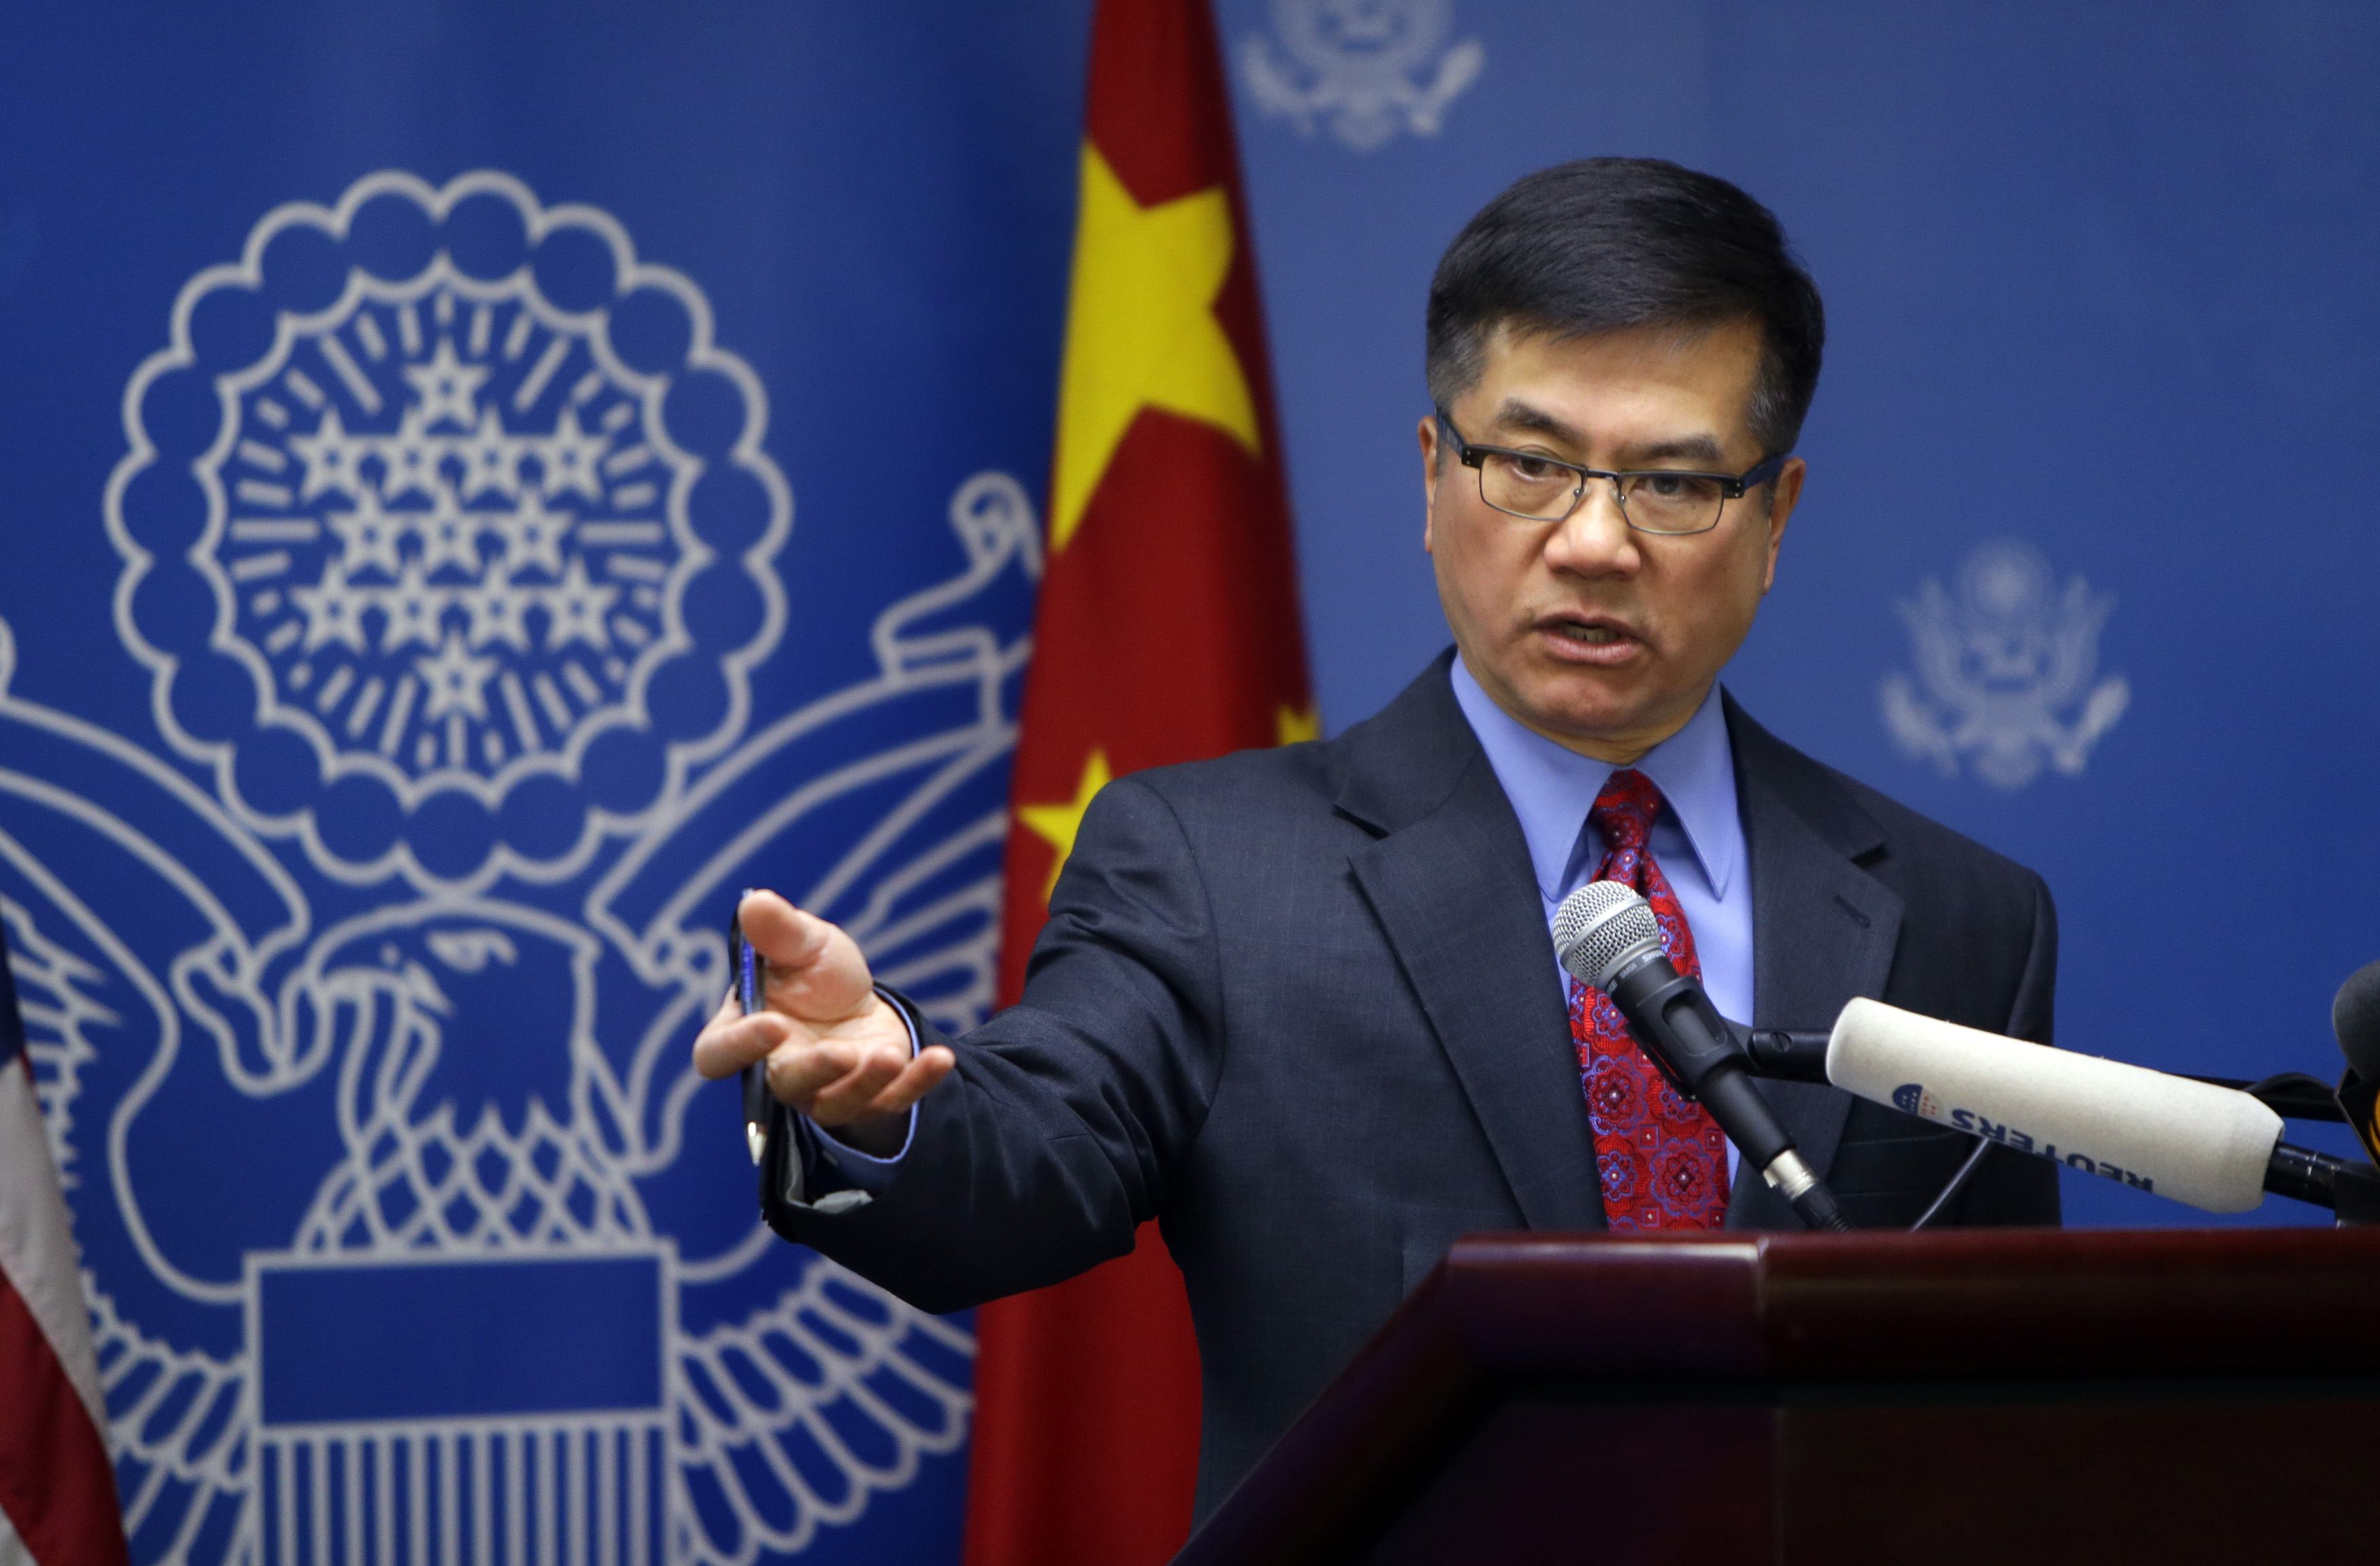 Outgoing US Ambassador Gary Locke speaks at a conference in Beijing on Wednesday. Photo: Reuters